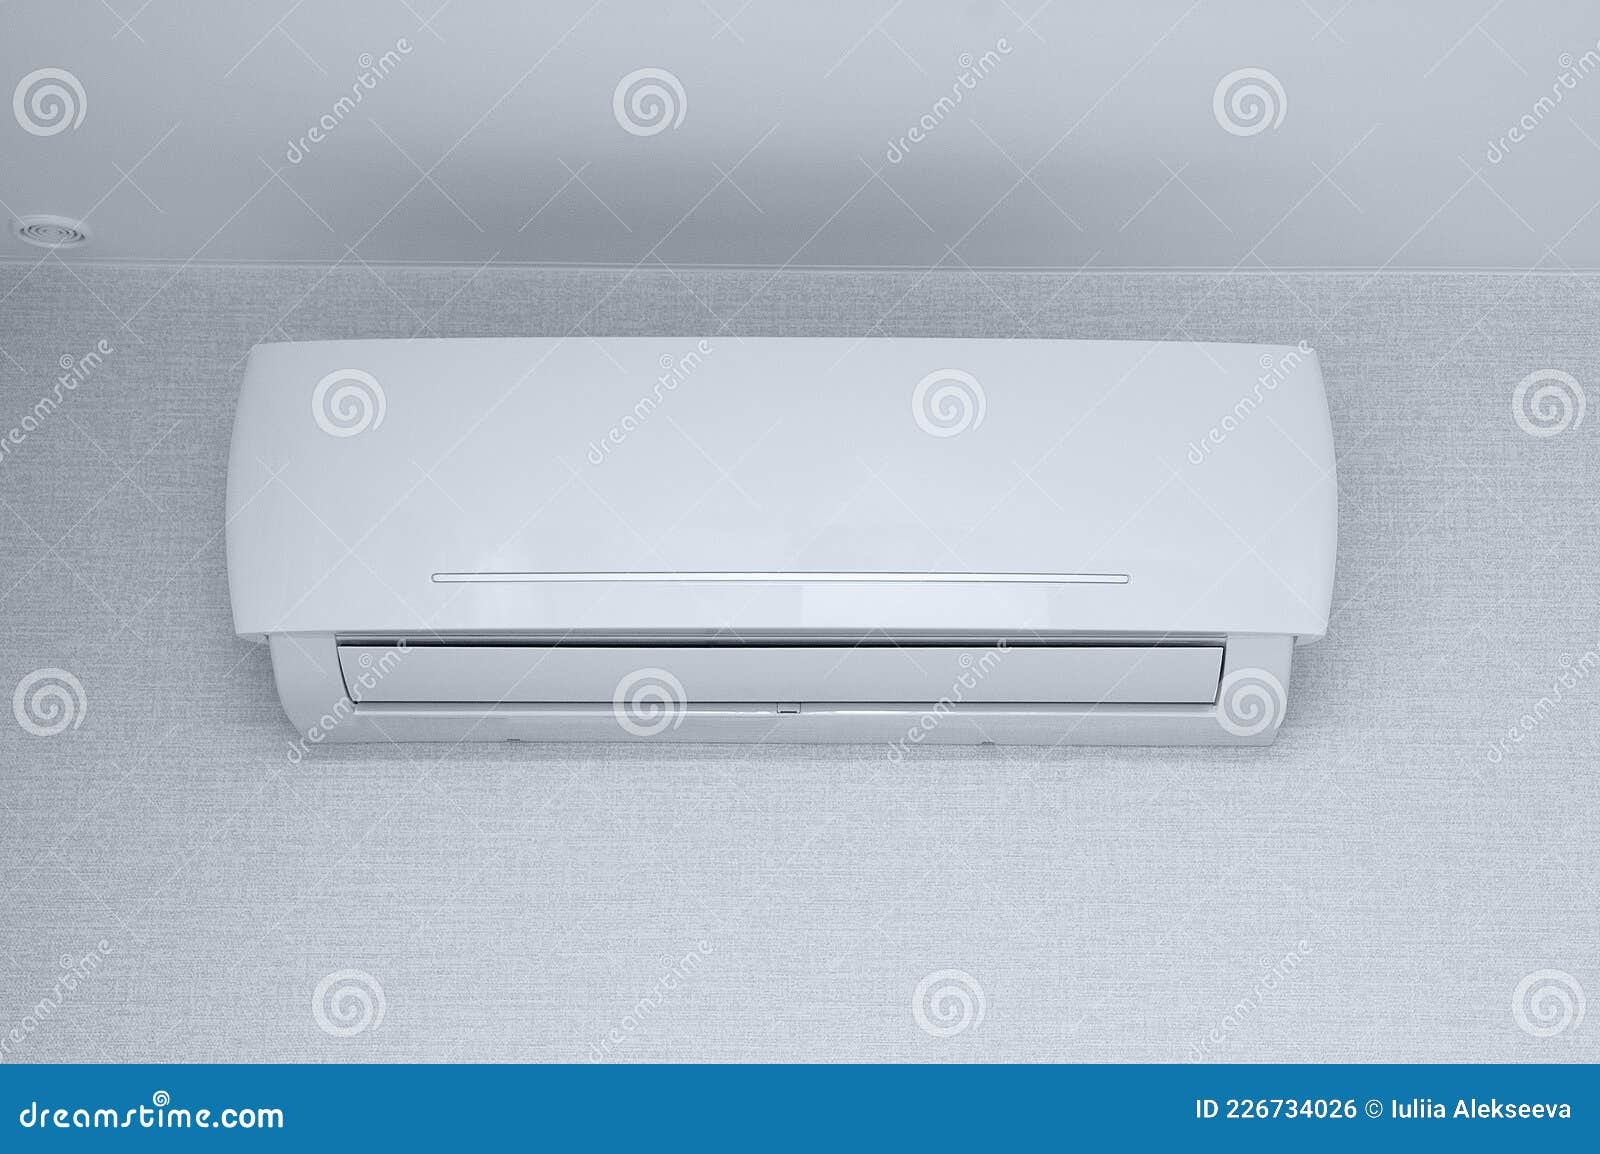 Realistic air conditioner on wall background Vector Image